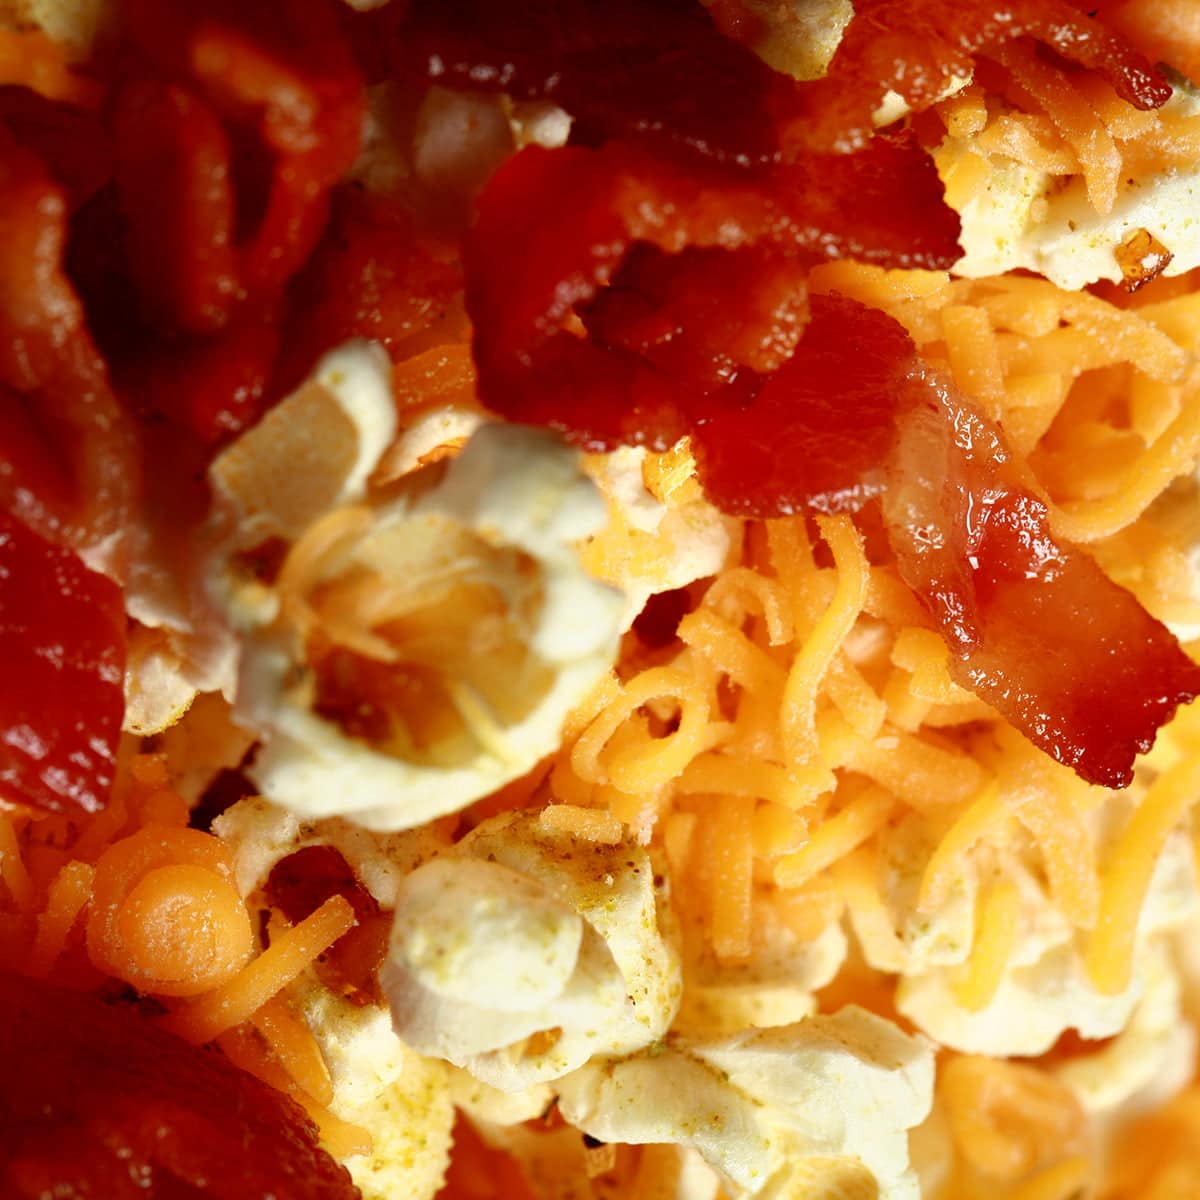 A close up view of Porter's Epic Popcorn - Popcorn with bacon, cheese, and jalapeno powder on it.